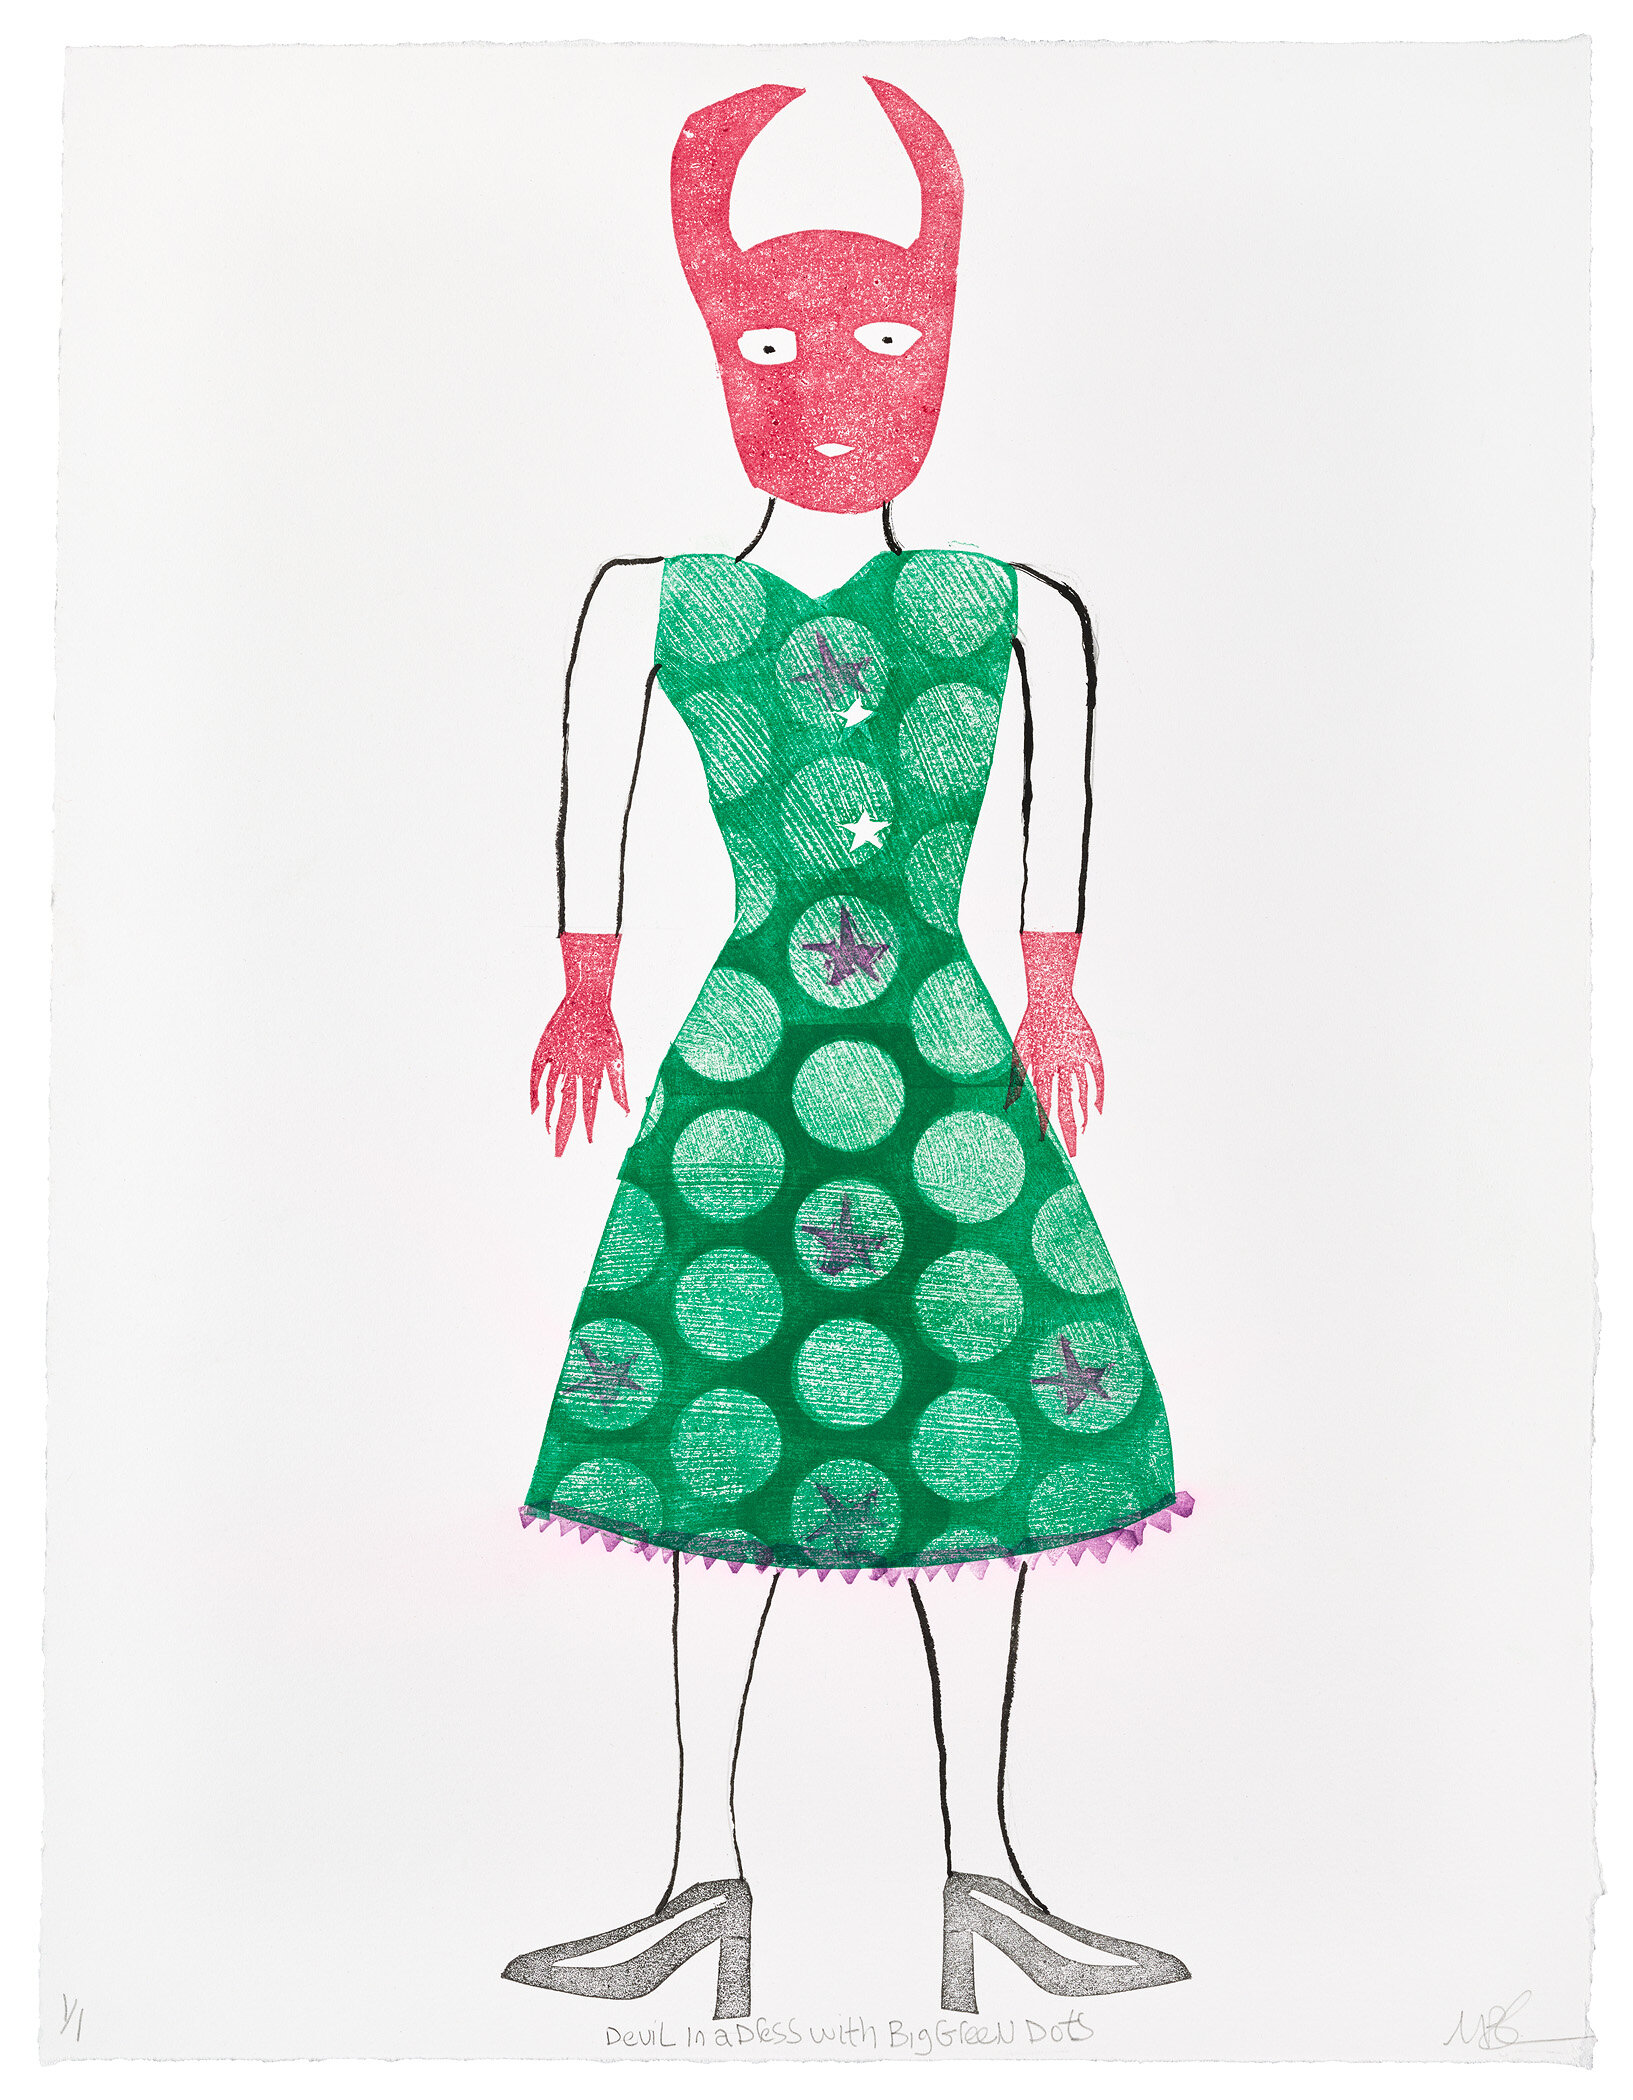 Devil in a Dress with Big Green Dots